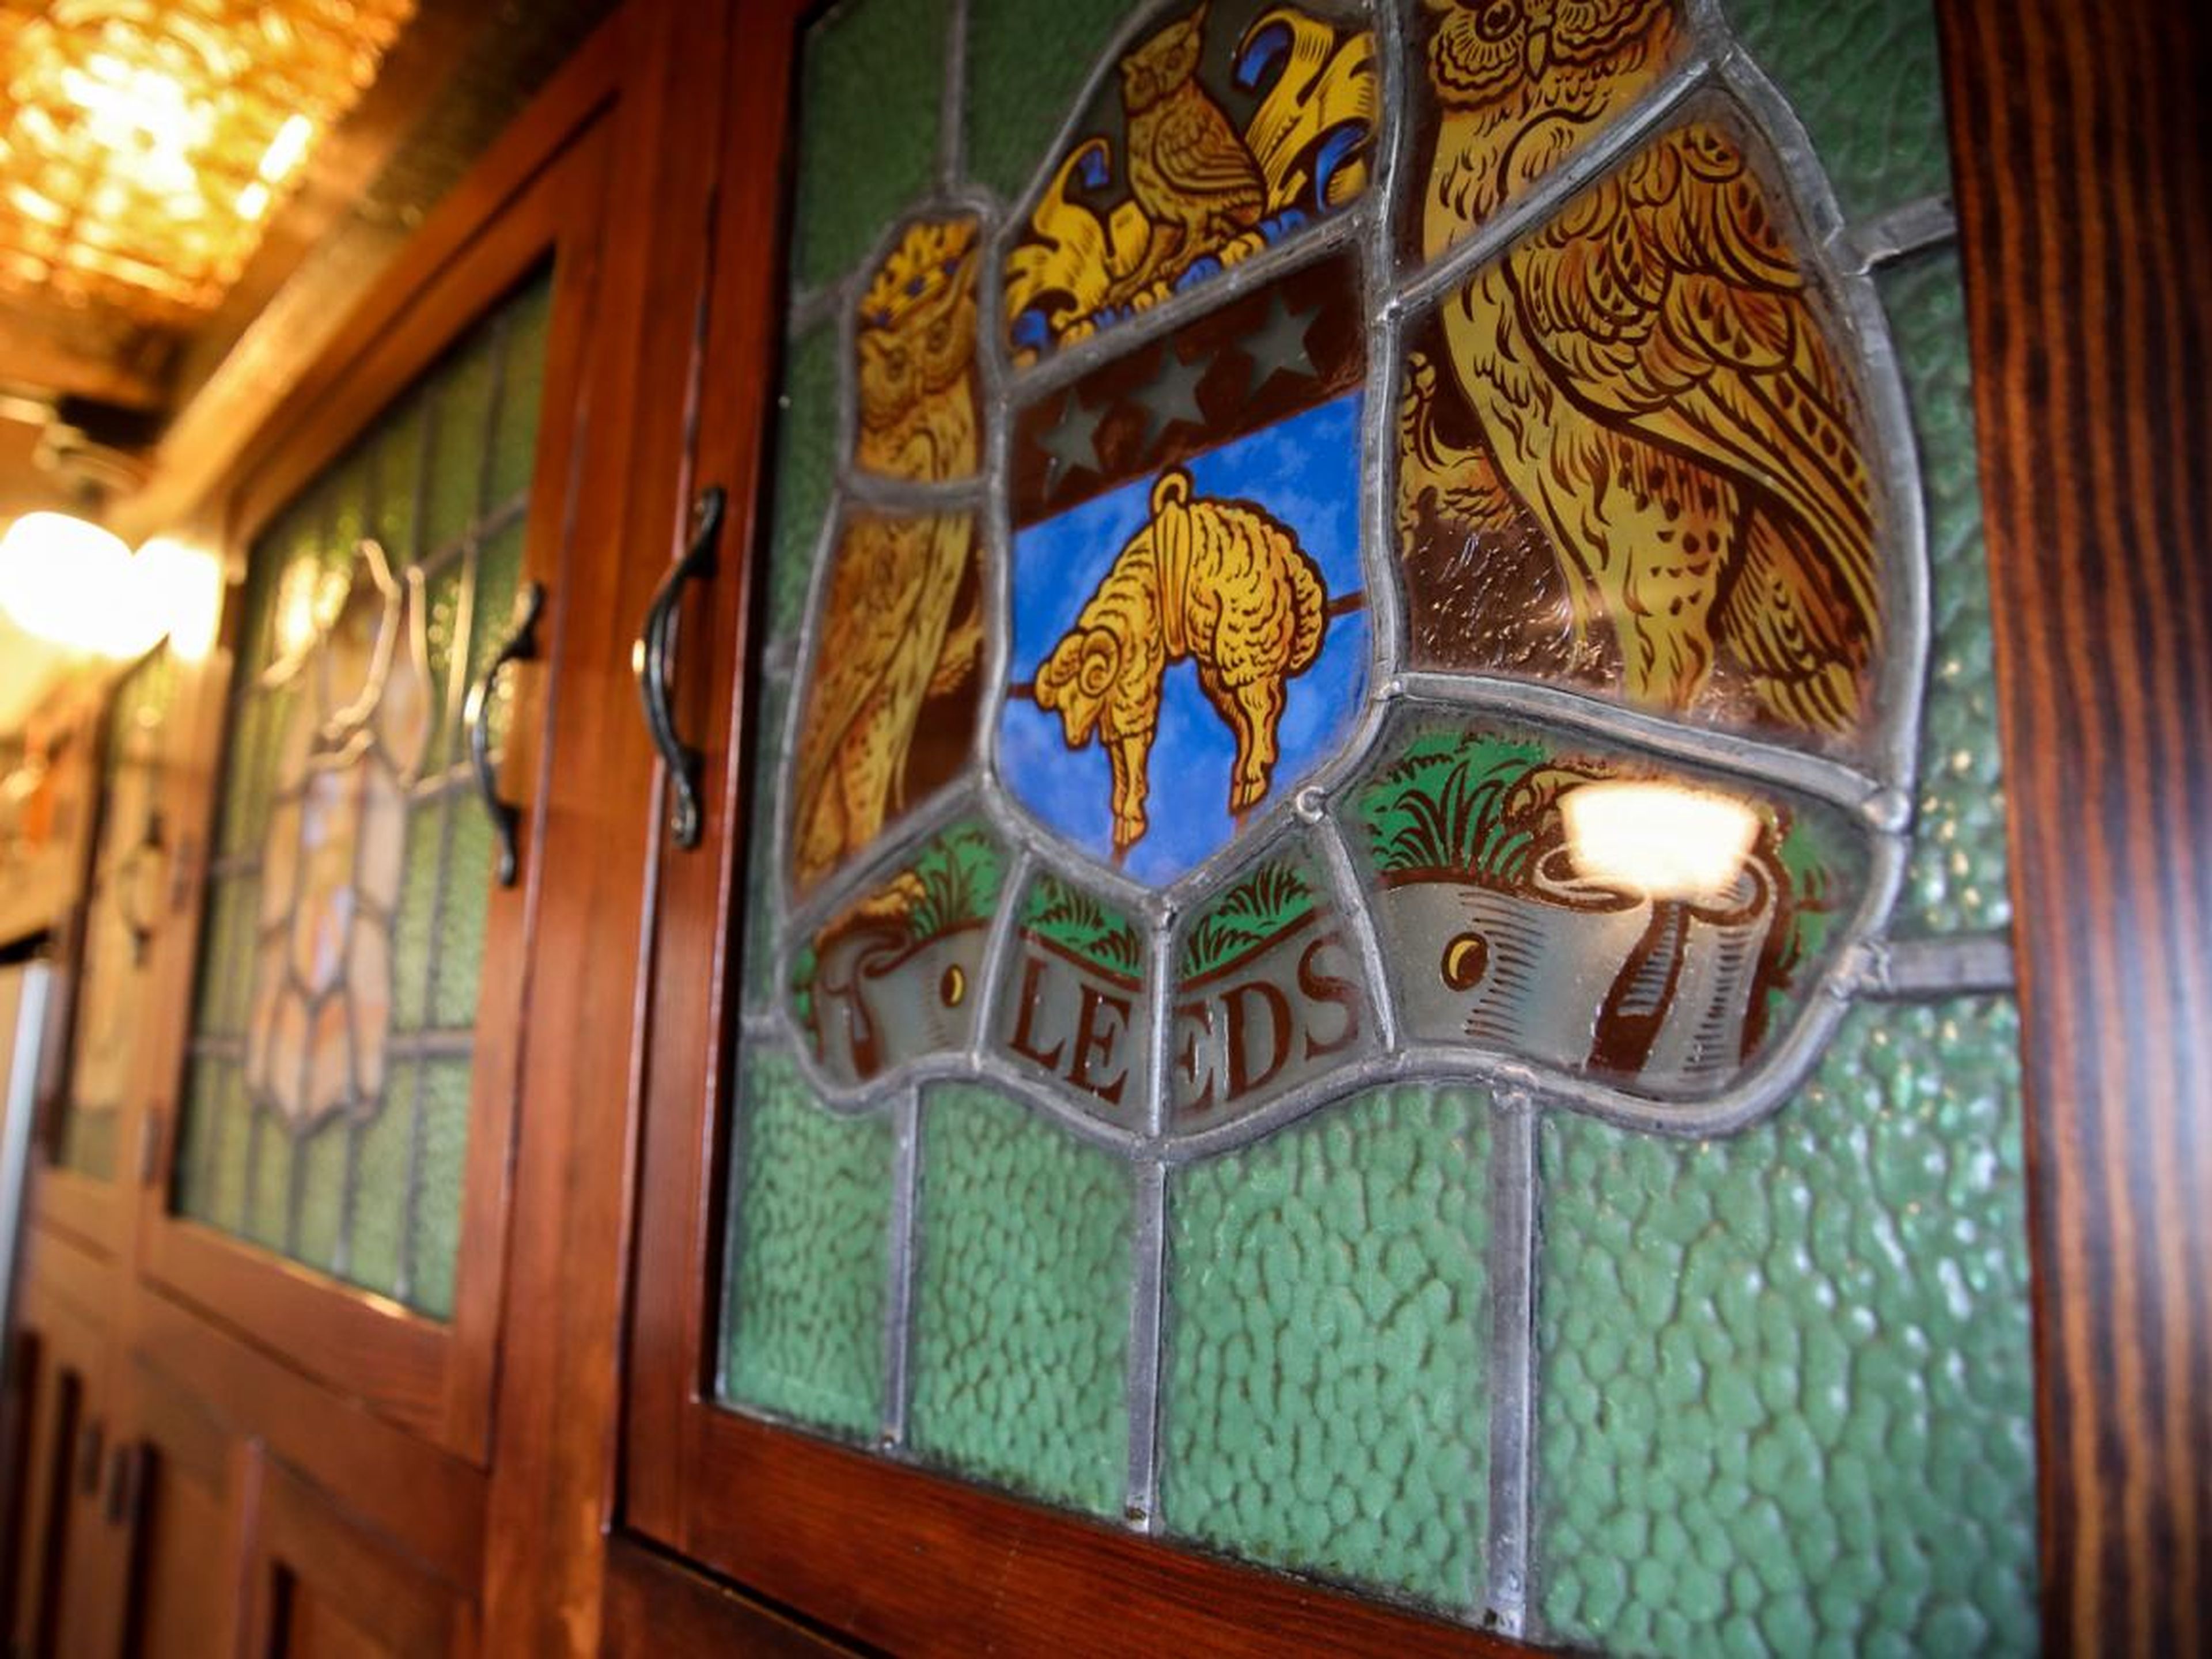 Stained-glass panels on the cabinetry were added during the time that Voisin owned the place.